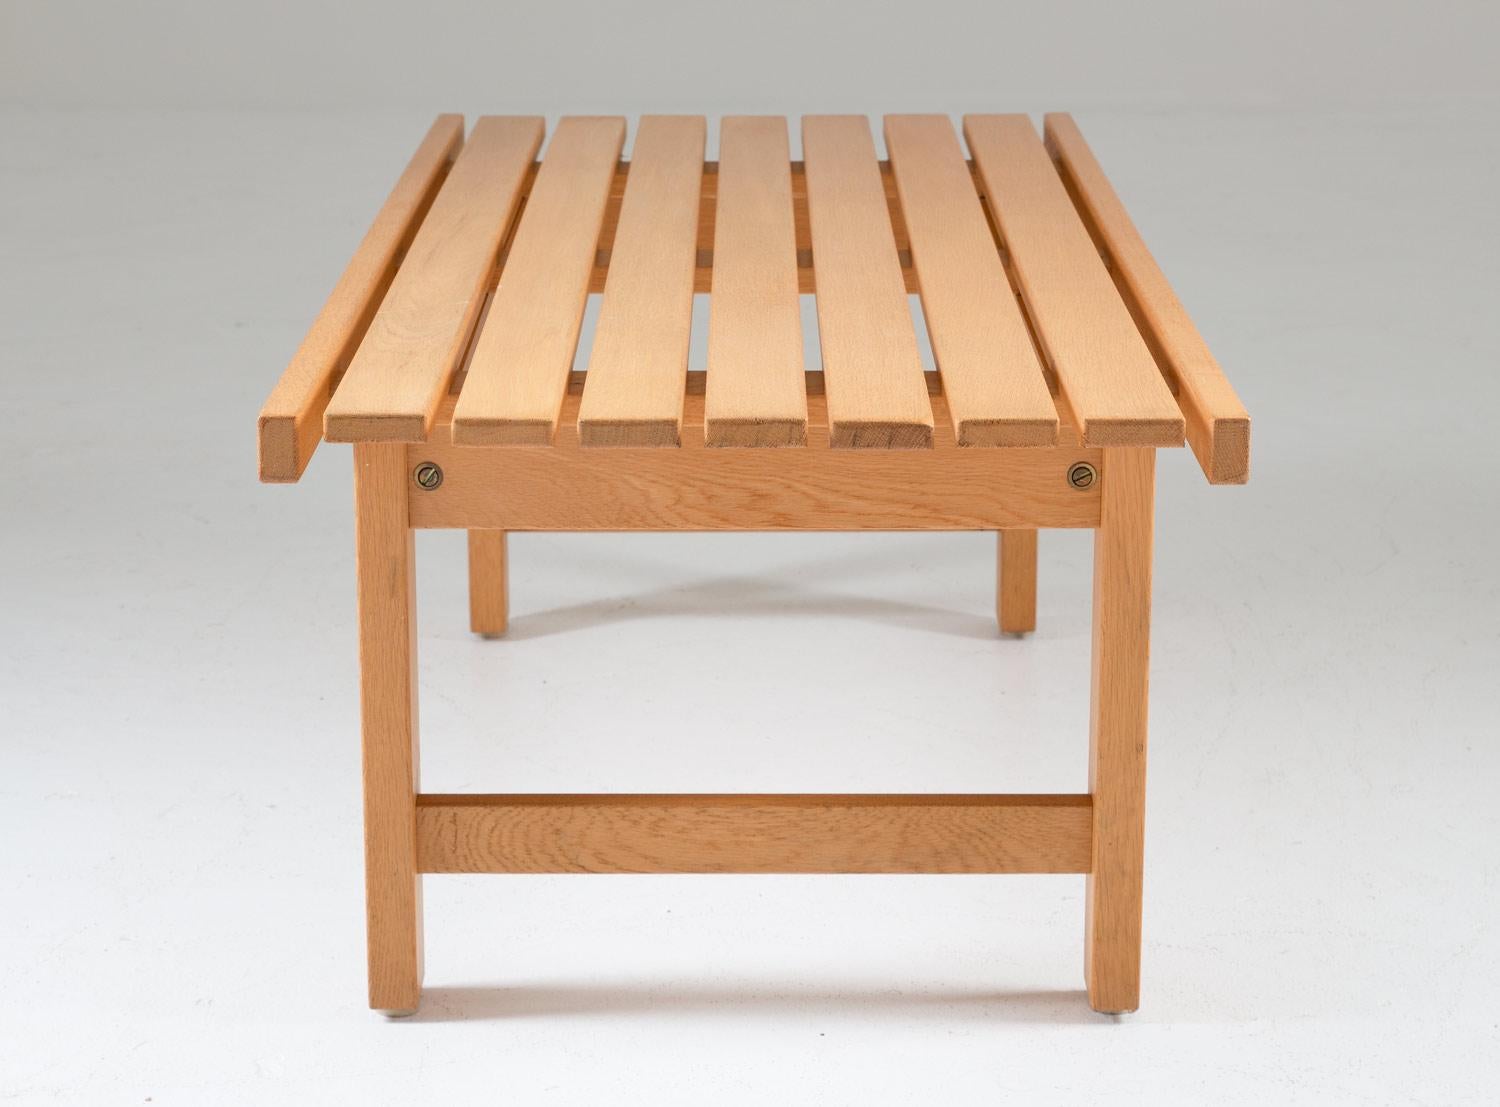 Swedish midcentury bench in oak by Hugo Svensson for Bjärnums, Sweden.
Small bench with great details and beautiful proportions.
Condition: Excellent original condition.
 